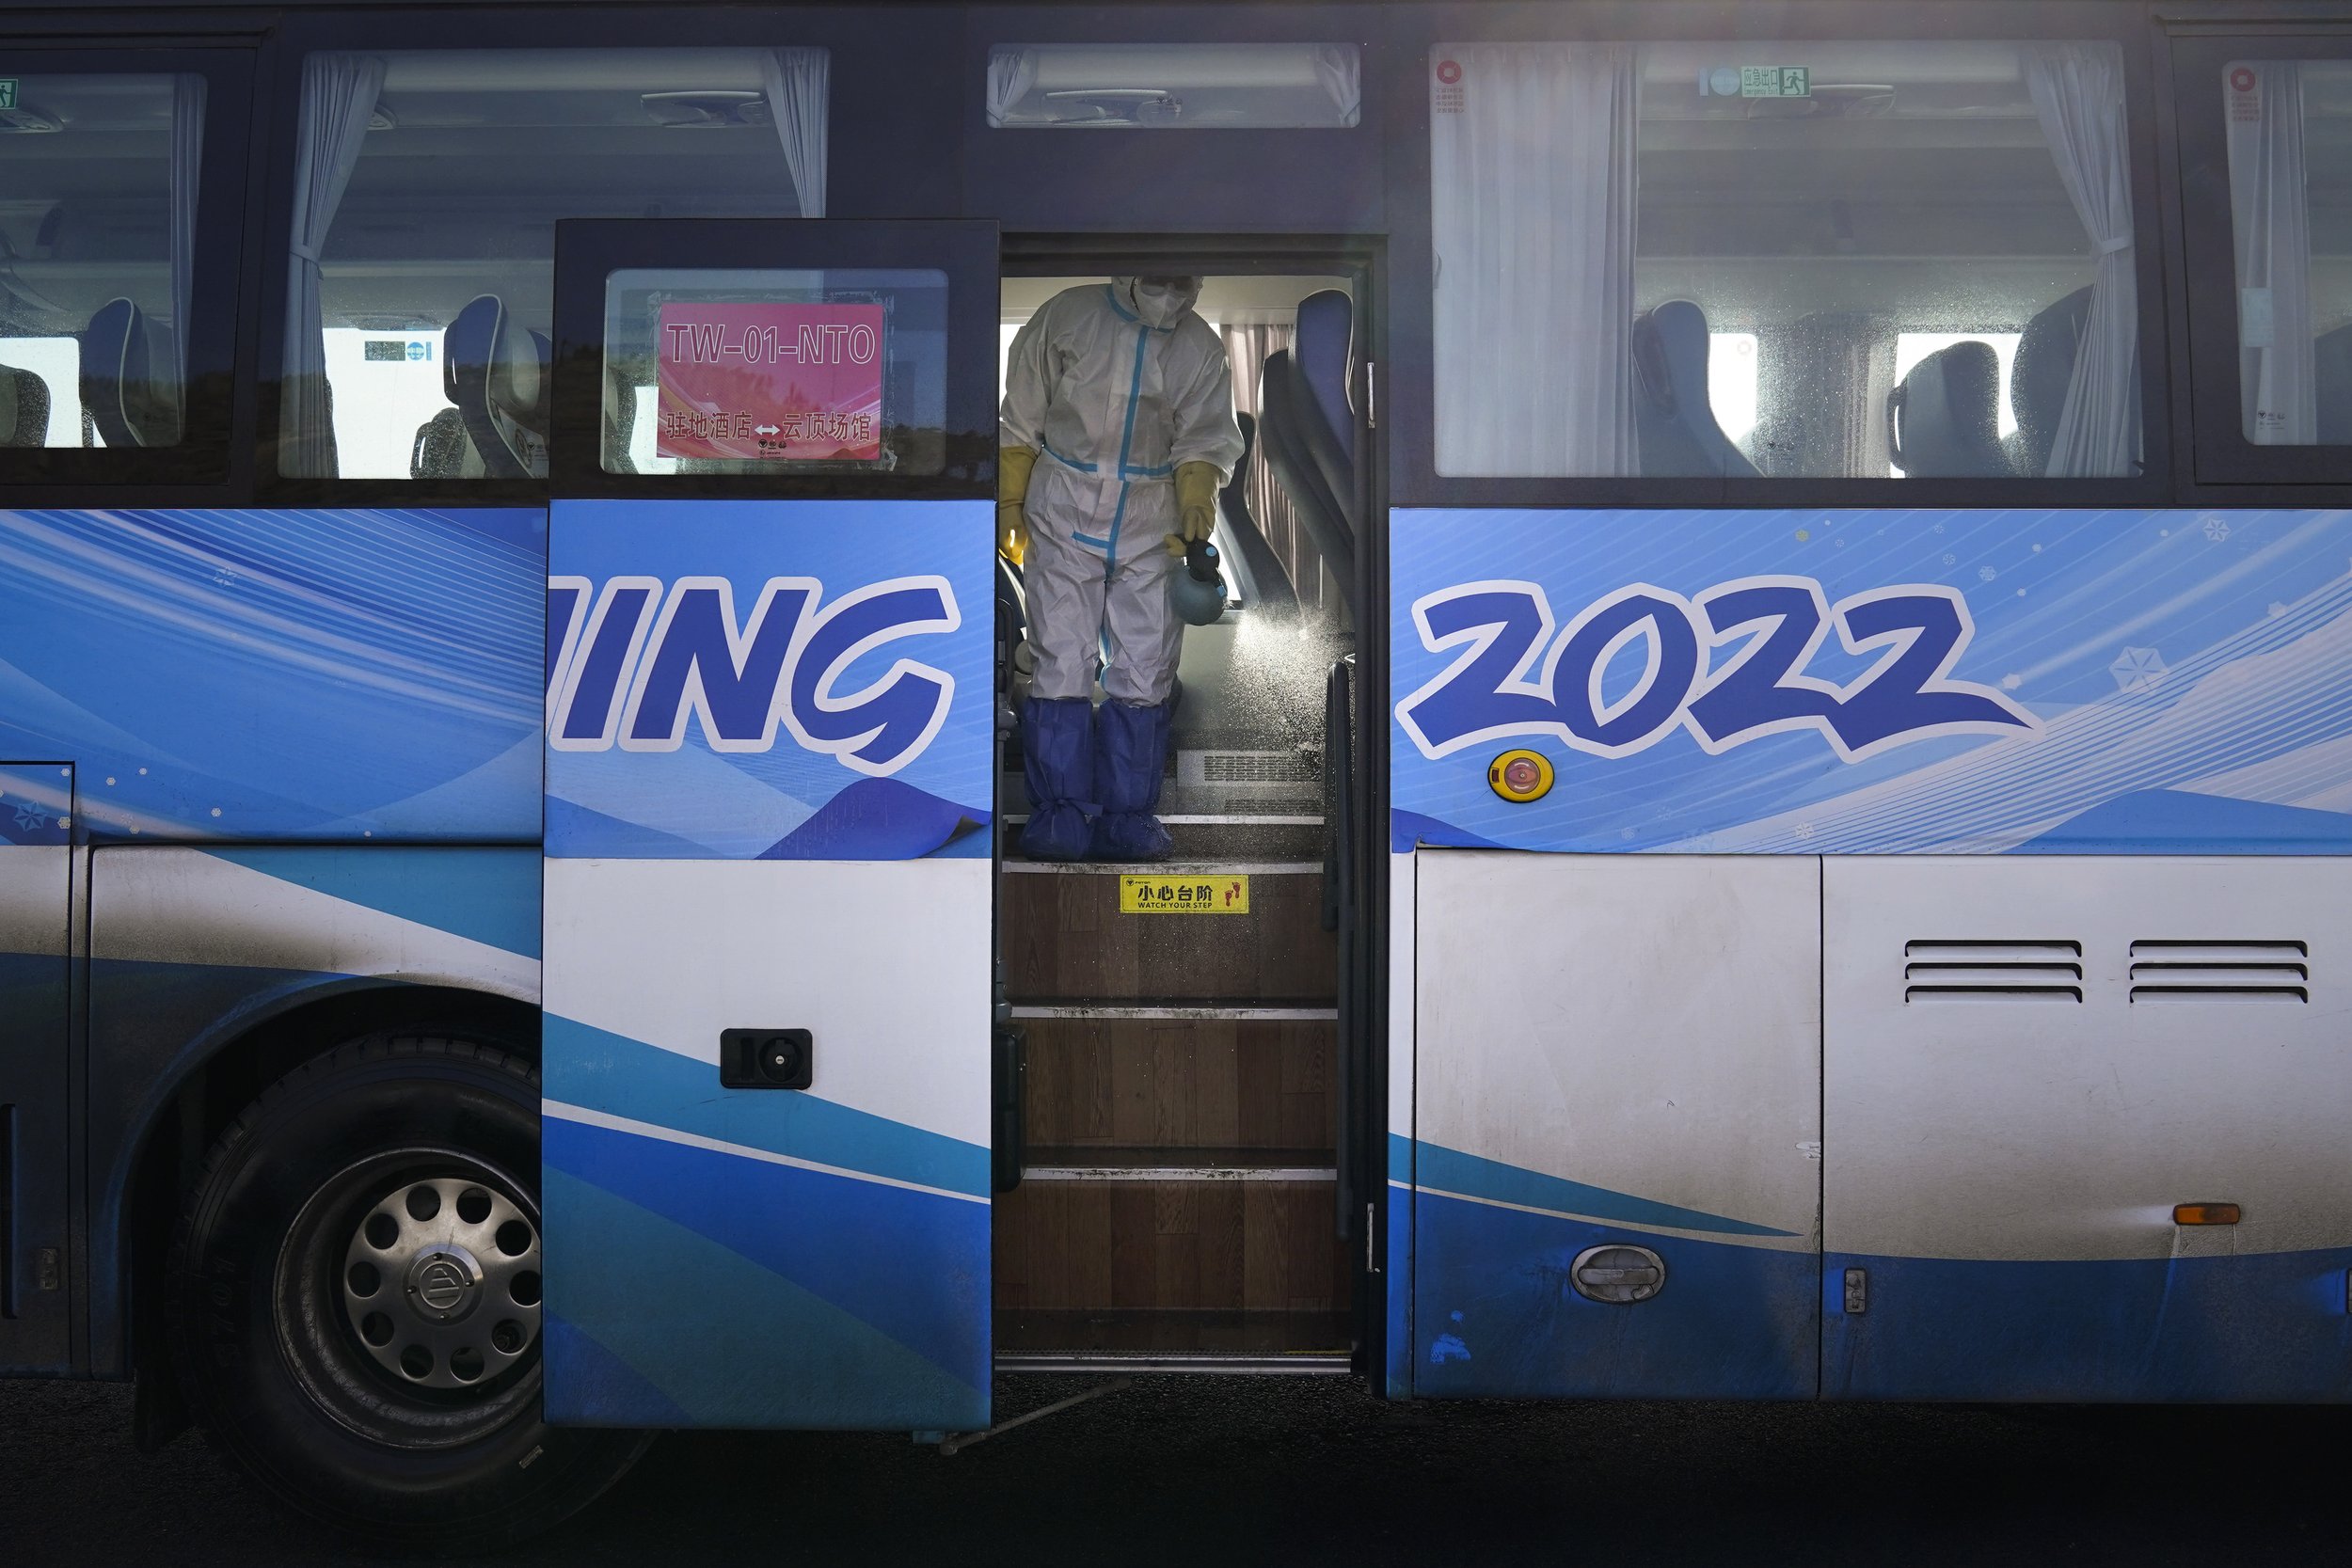  A worker in protective gear disinfects an Olympic shuttle bus ahead of the 2022 Winter Olympics, Sunday, Jan. 30, 2022, in Zhangjiakou, China. (AP Photo/Jae C. Hong) 